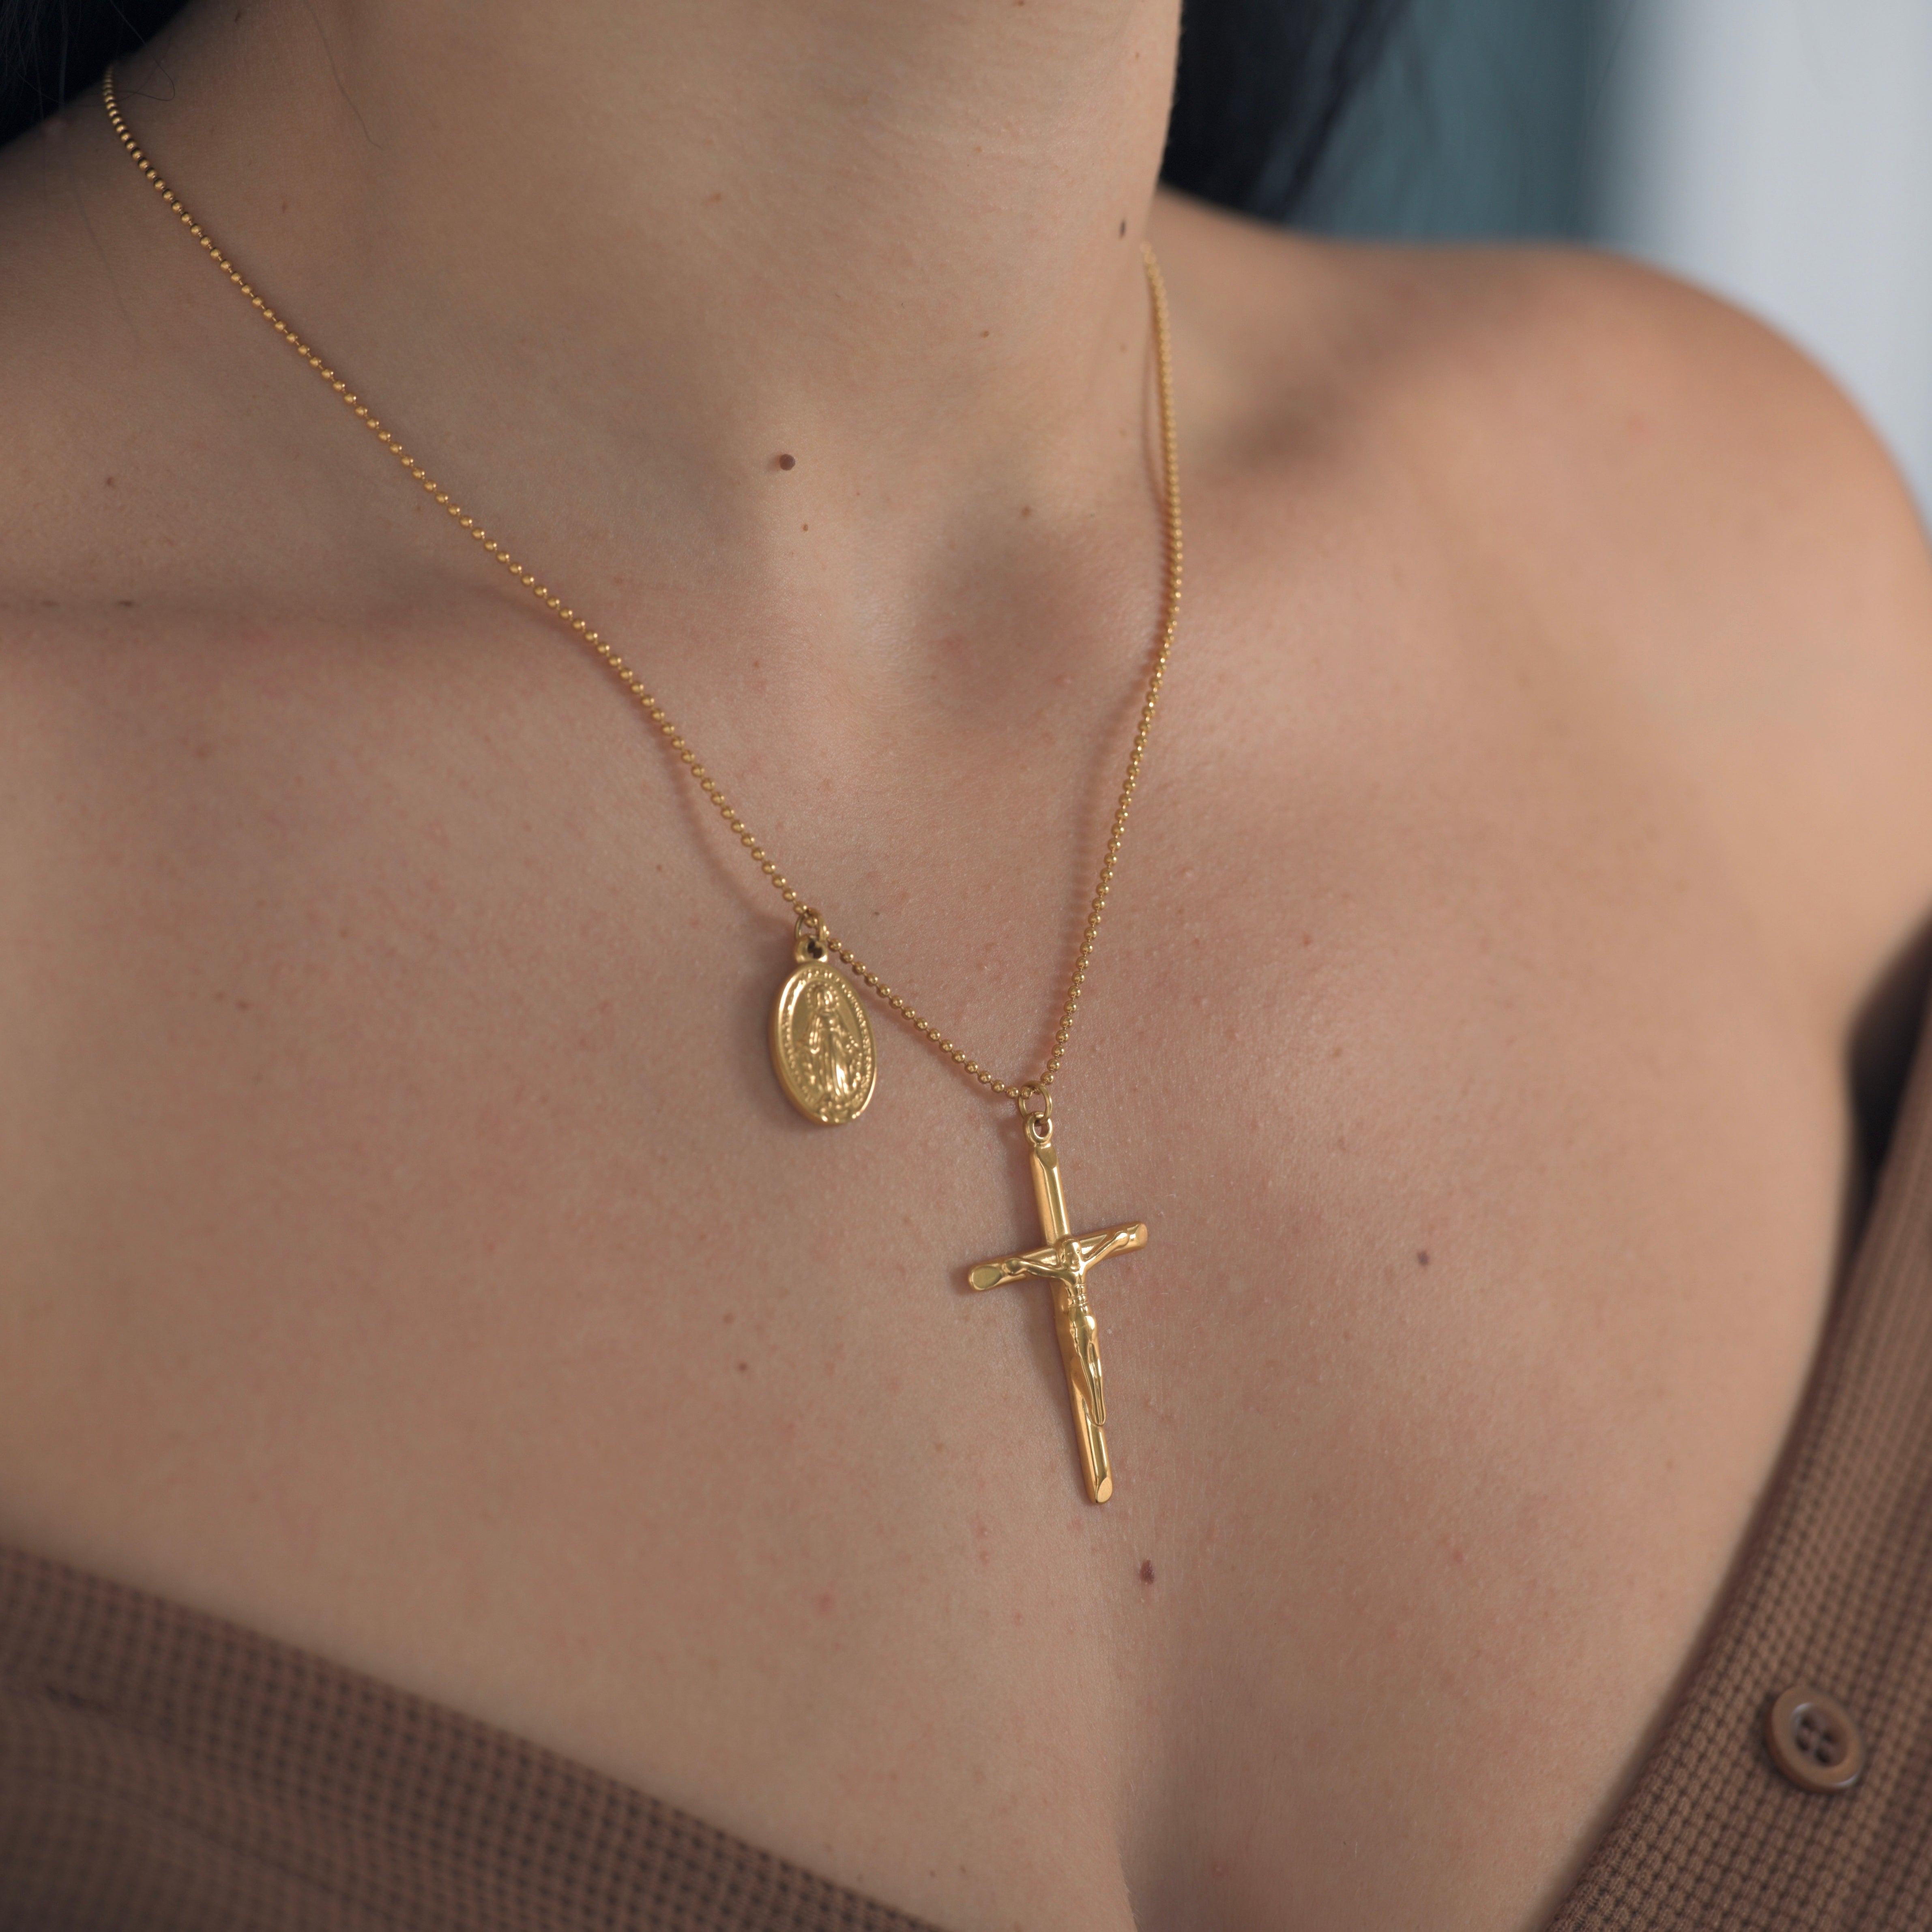 Gold cross pendant necklace. Cross pendant with jesus crist in the crucifix. Oval shape small drop on the side with mother mary on top of it.